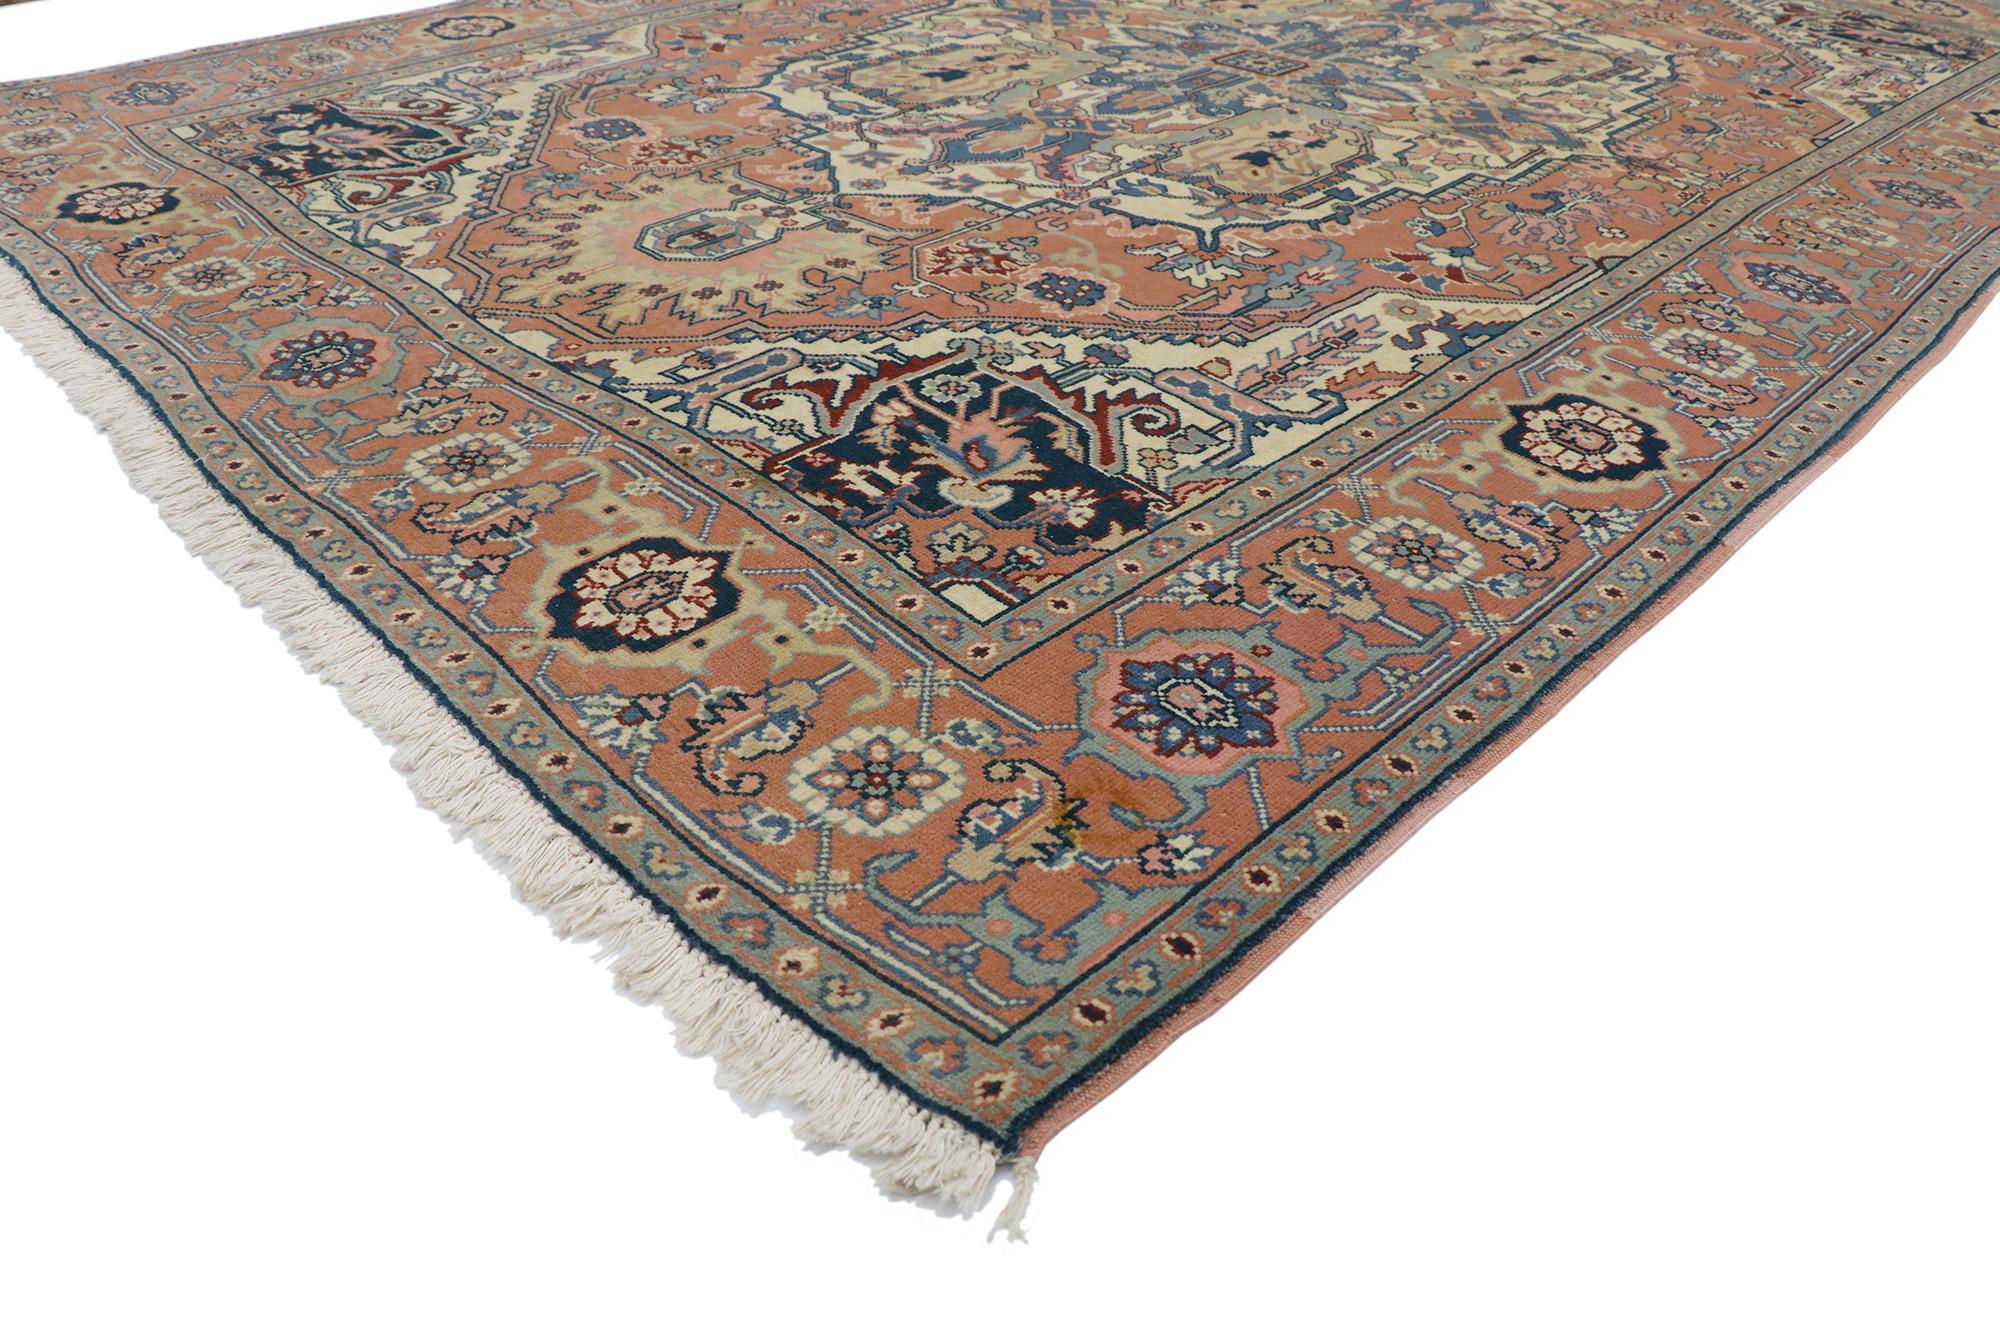 72042 Vintage Romanian Serapi Rug, 06'01 x 08'11. Romanian Serapi rugs are intricately designed handwoven carpets originating from Romania, renowned for their vibrant colors, geometric patterns, and floral motifs. Crafted with high-quality wool by